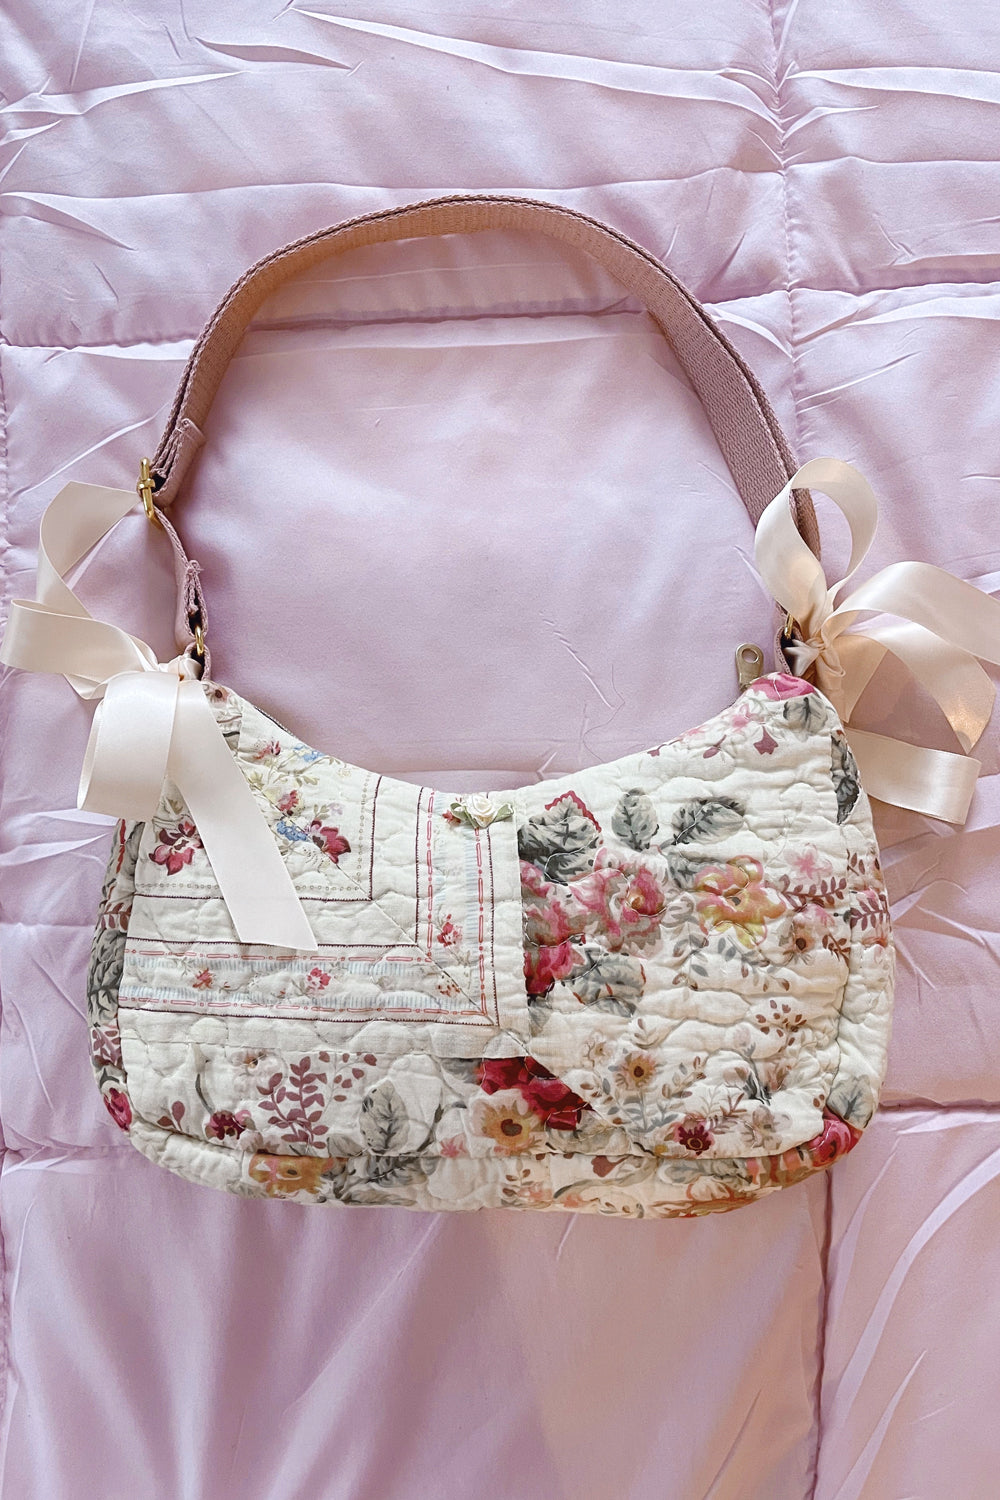 Ruffled Lace Tote Bag - Mitzi's Miscellany